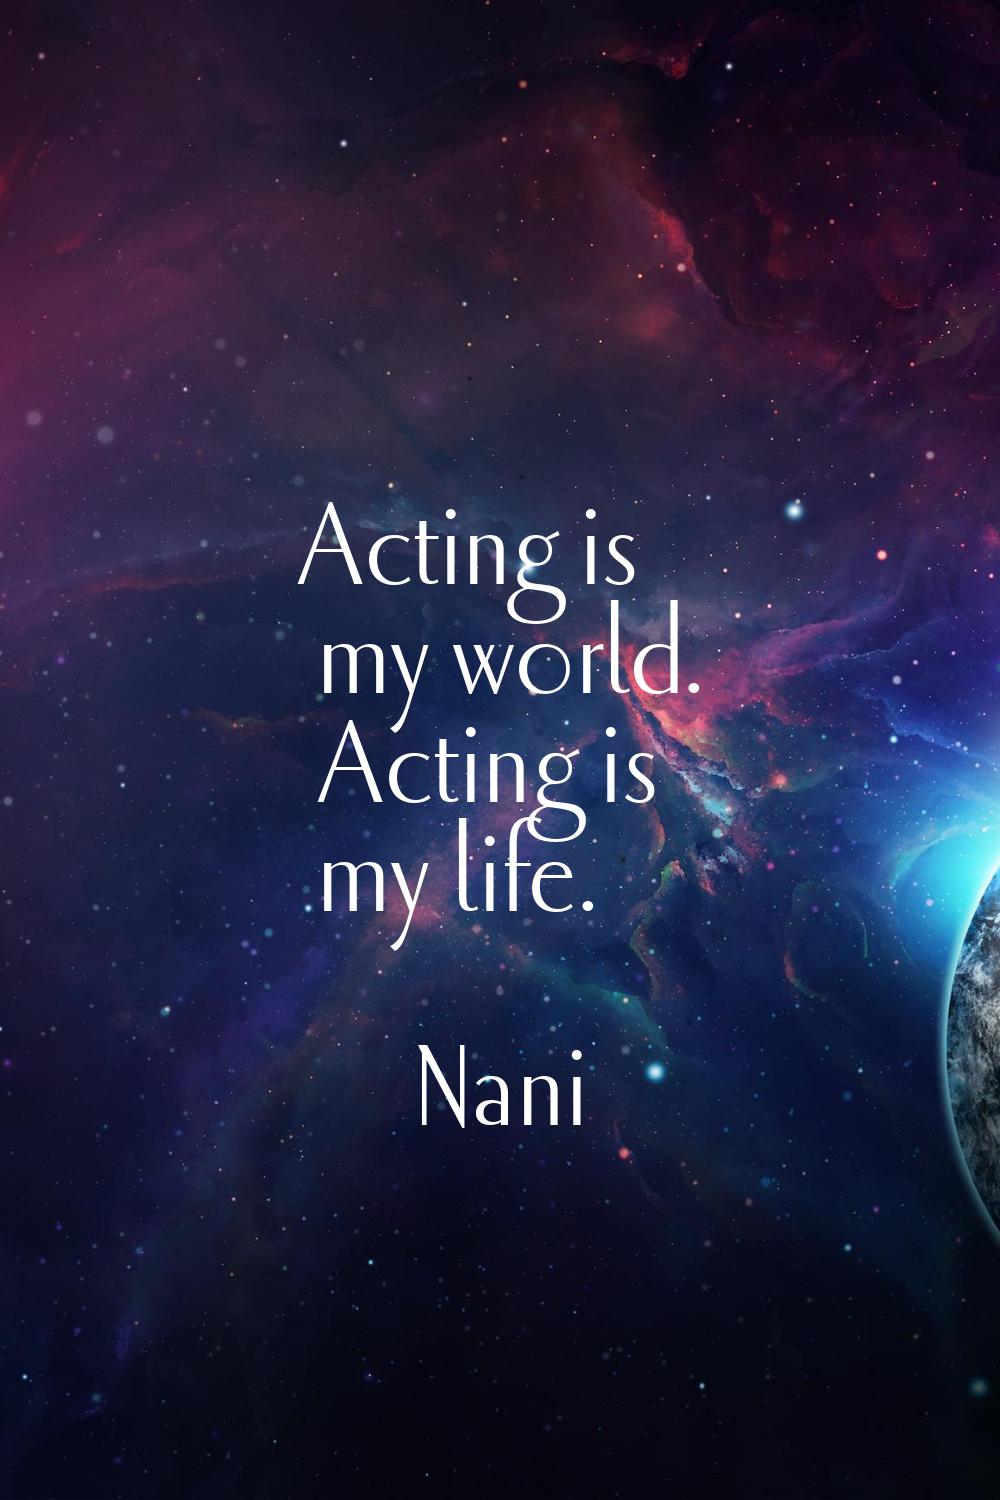 Acting is my world. Acting is my life.